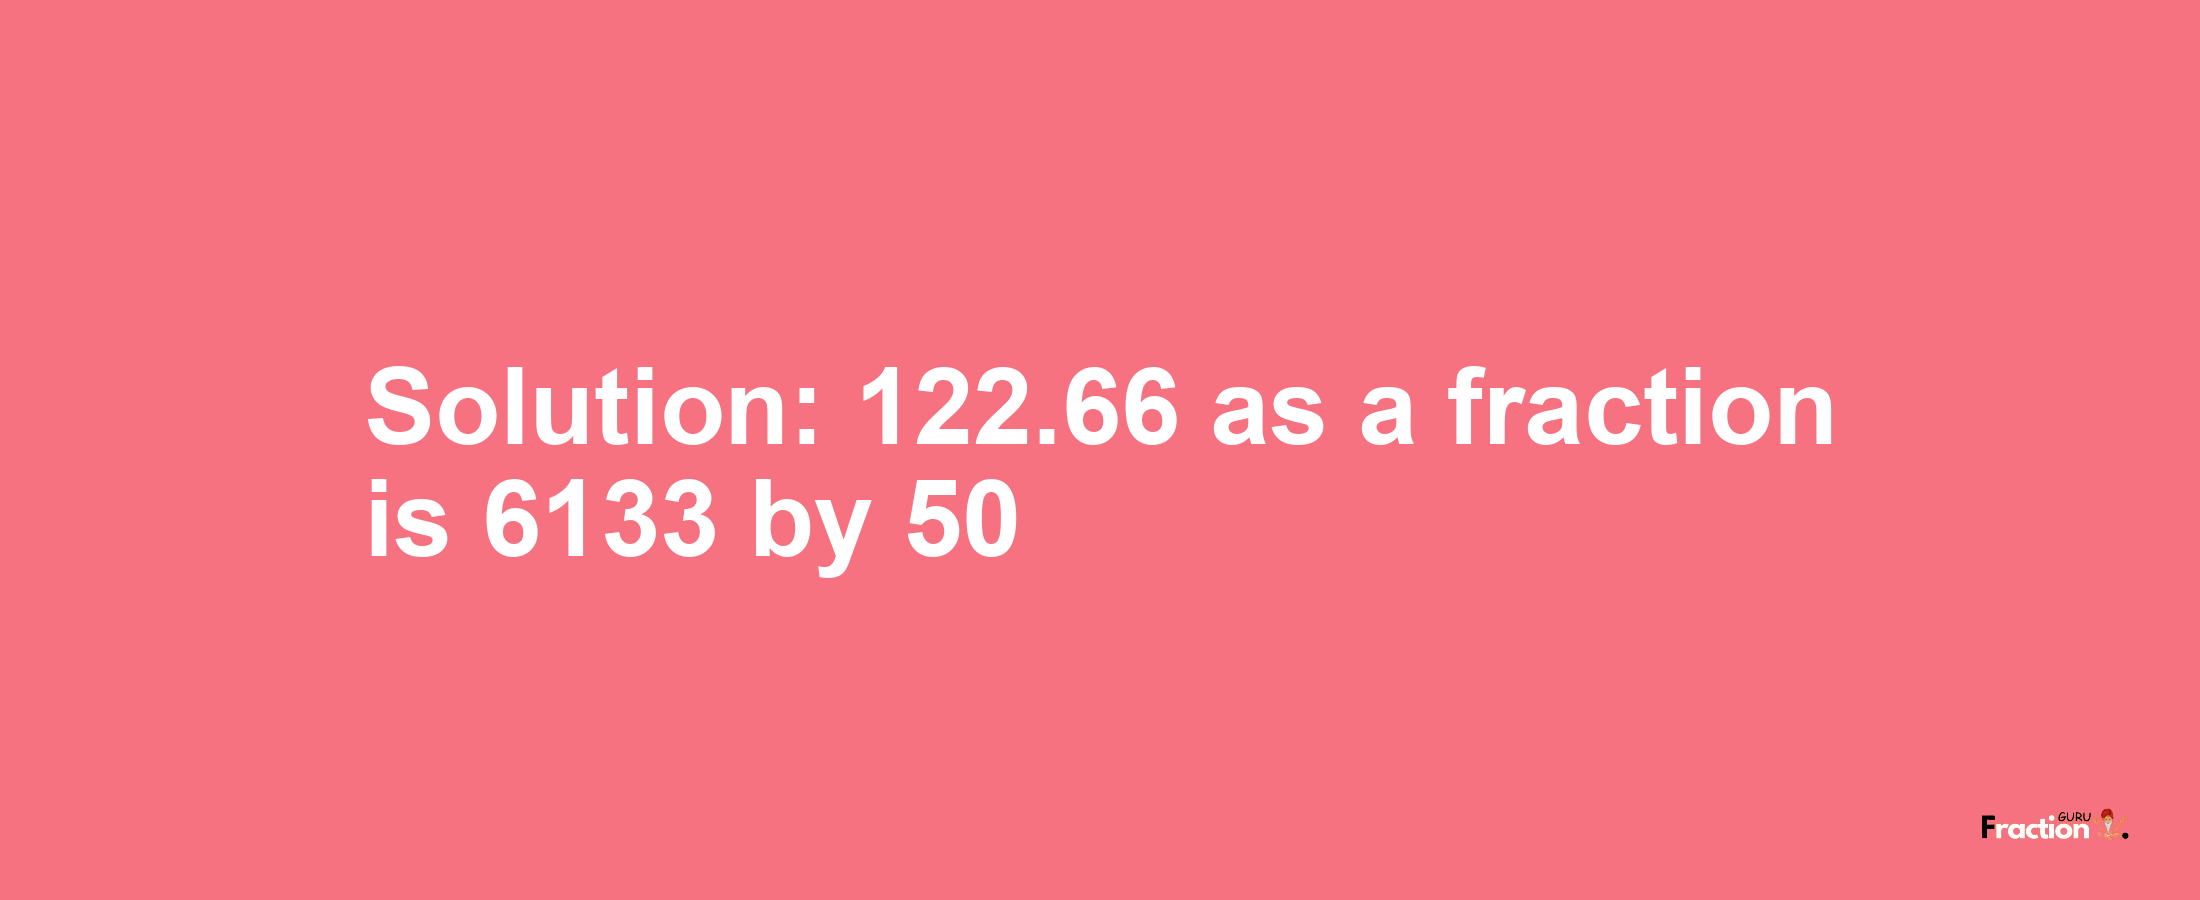 Solution:122.66 as a fraction is 6133/50